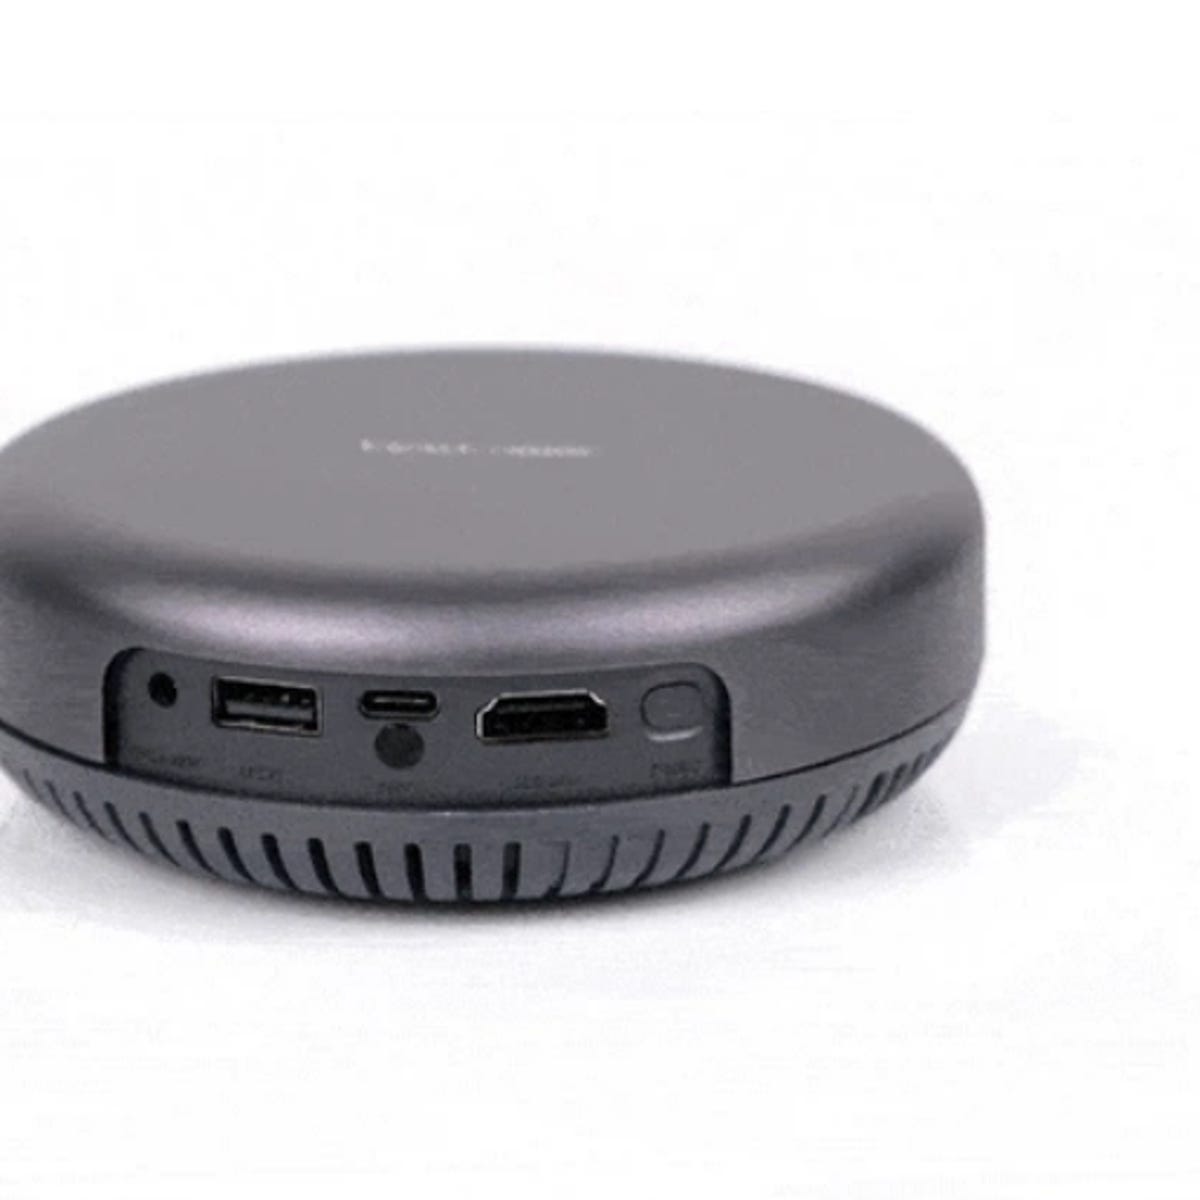 ViewComm iSpace 2 review: Compact, portable, go-anywhere projector 